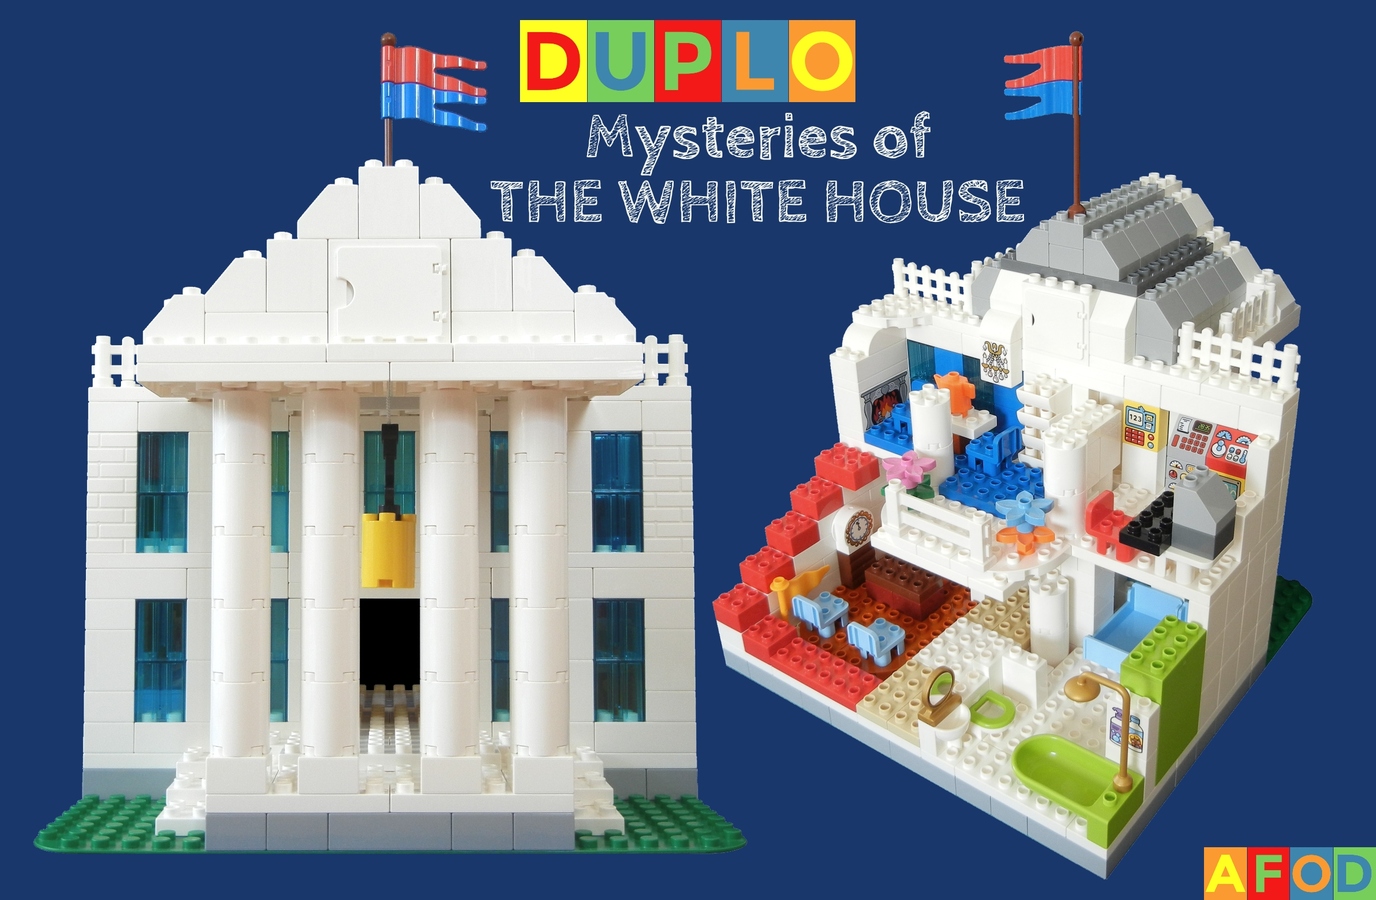 duplo-mysteries-of-the-white-house-afod.